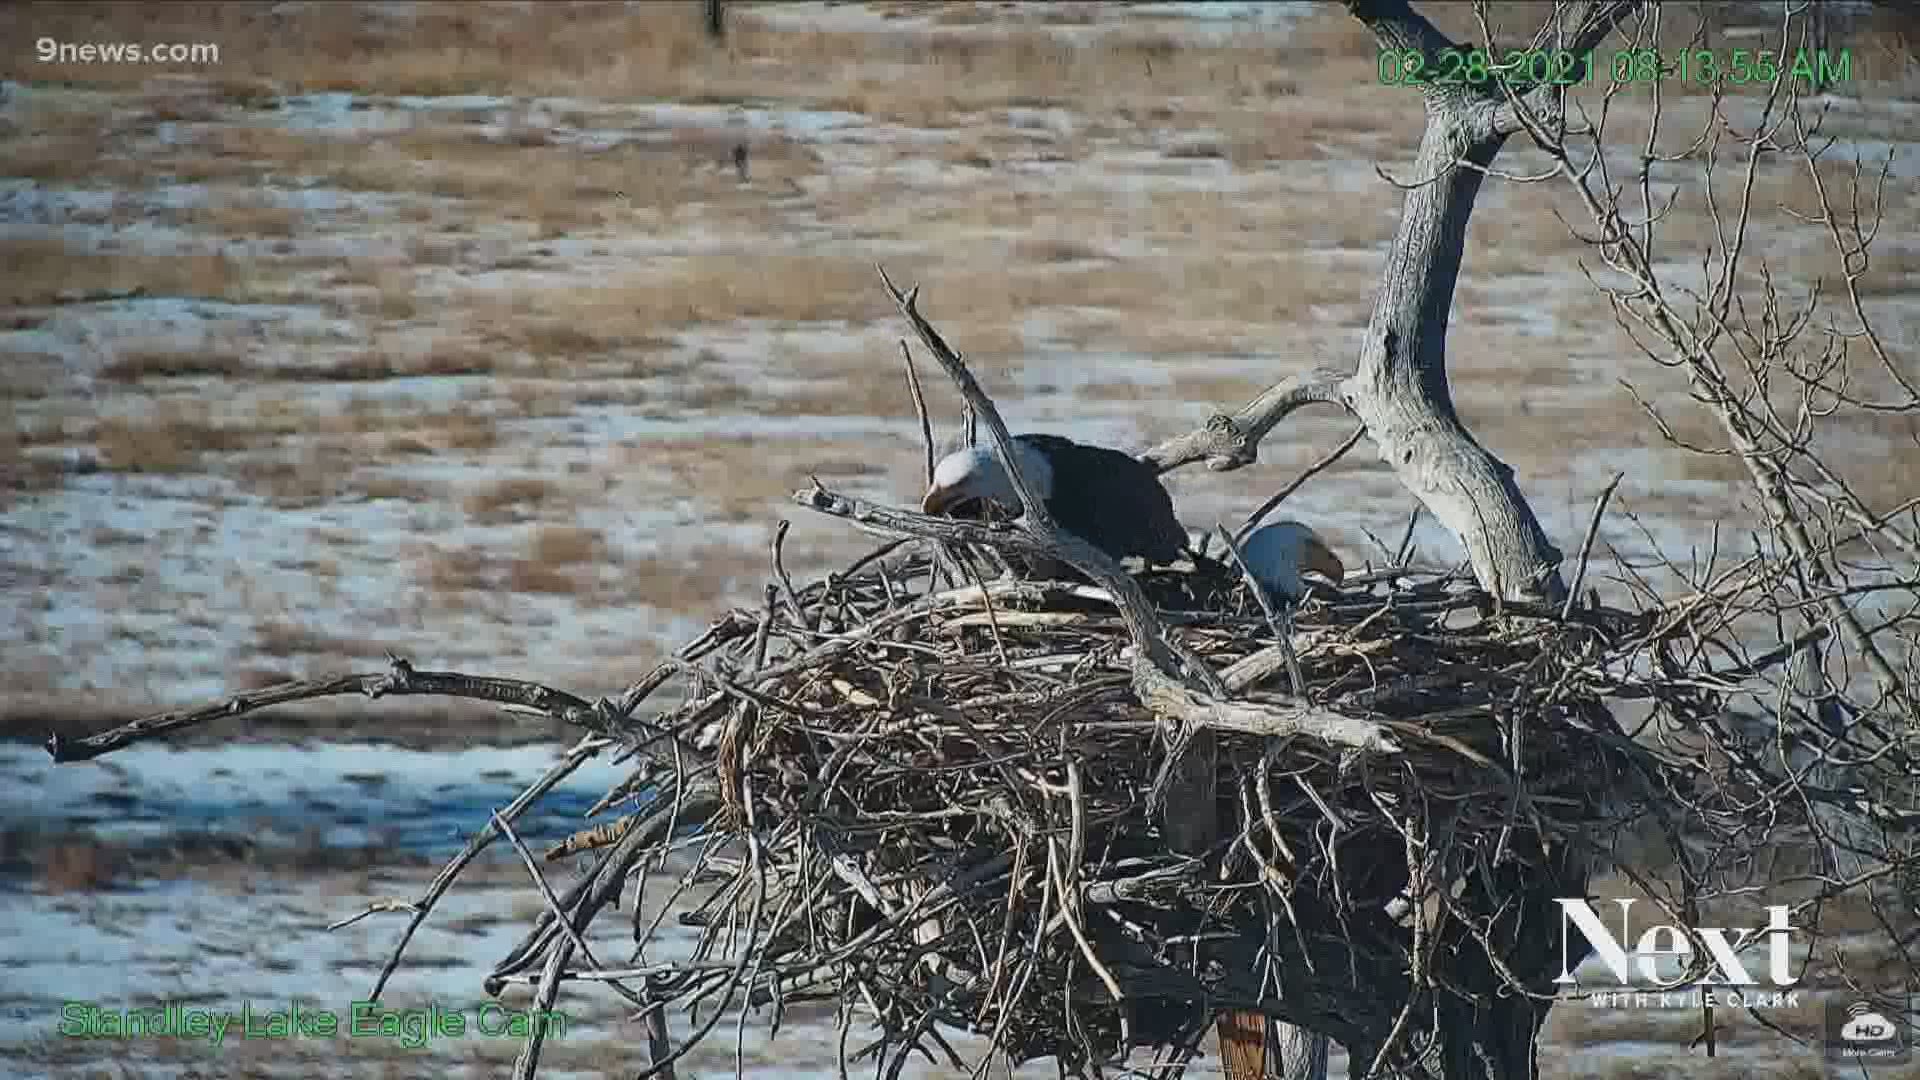 A year after drama erupted at the Standley Lake eagle's nest, F420 is a mom.